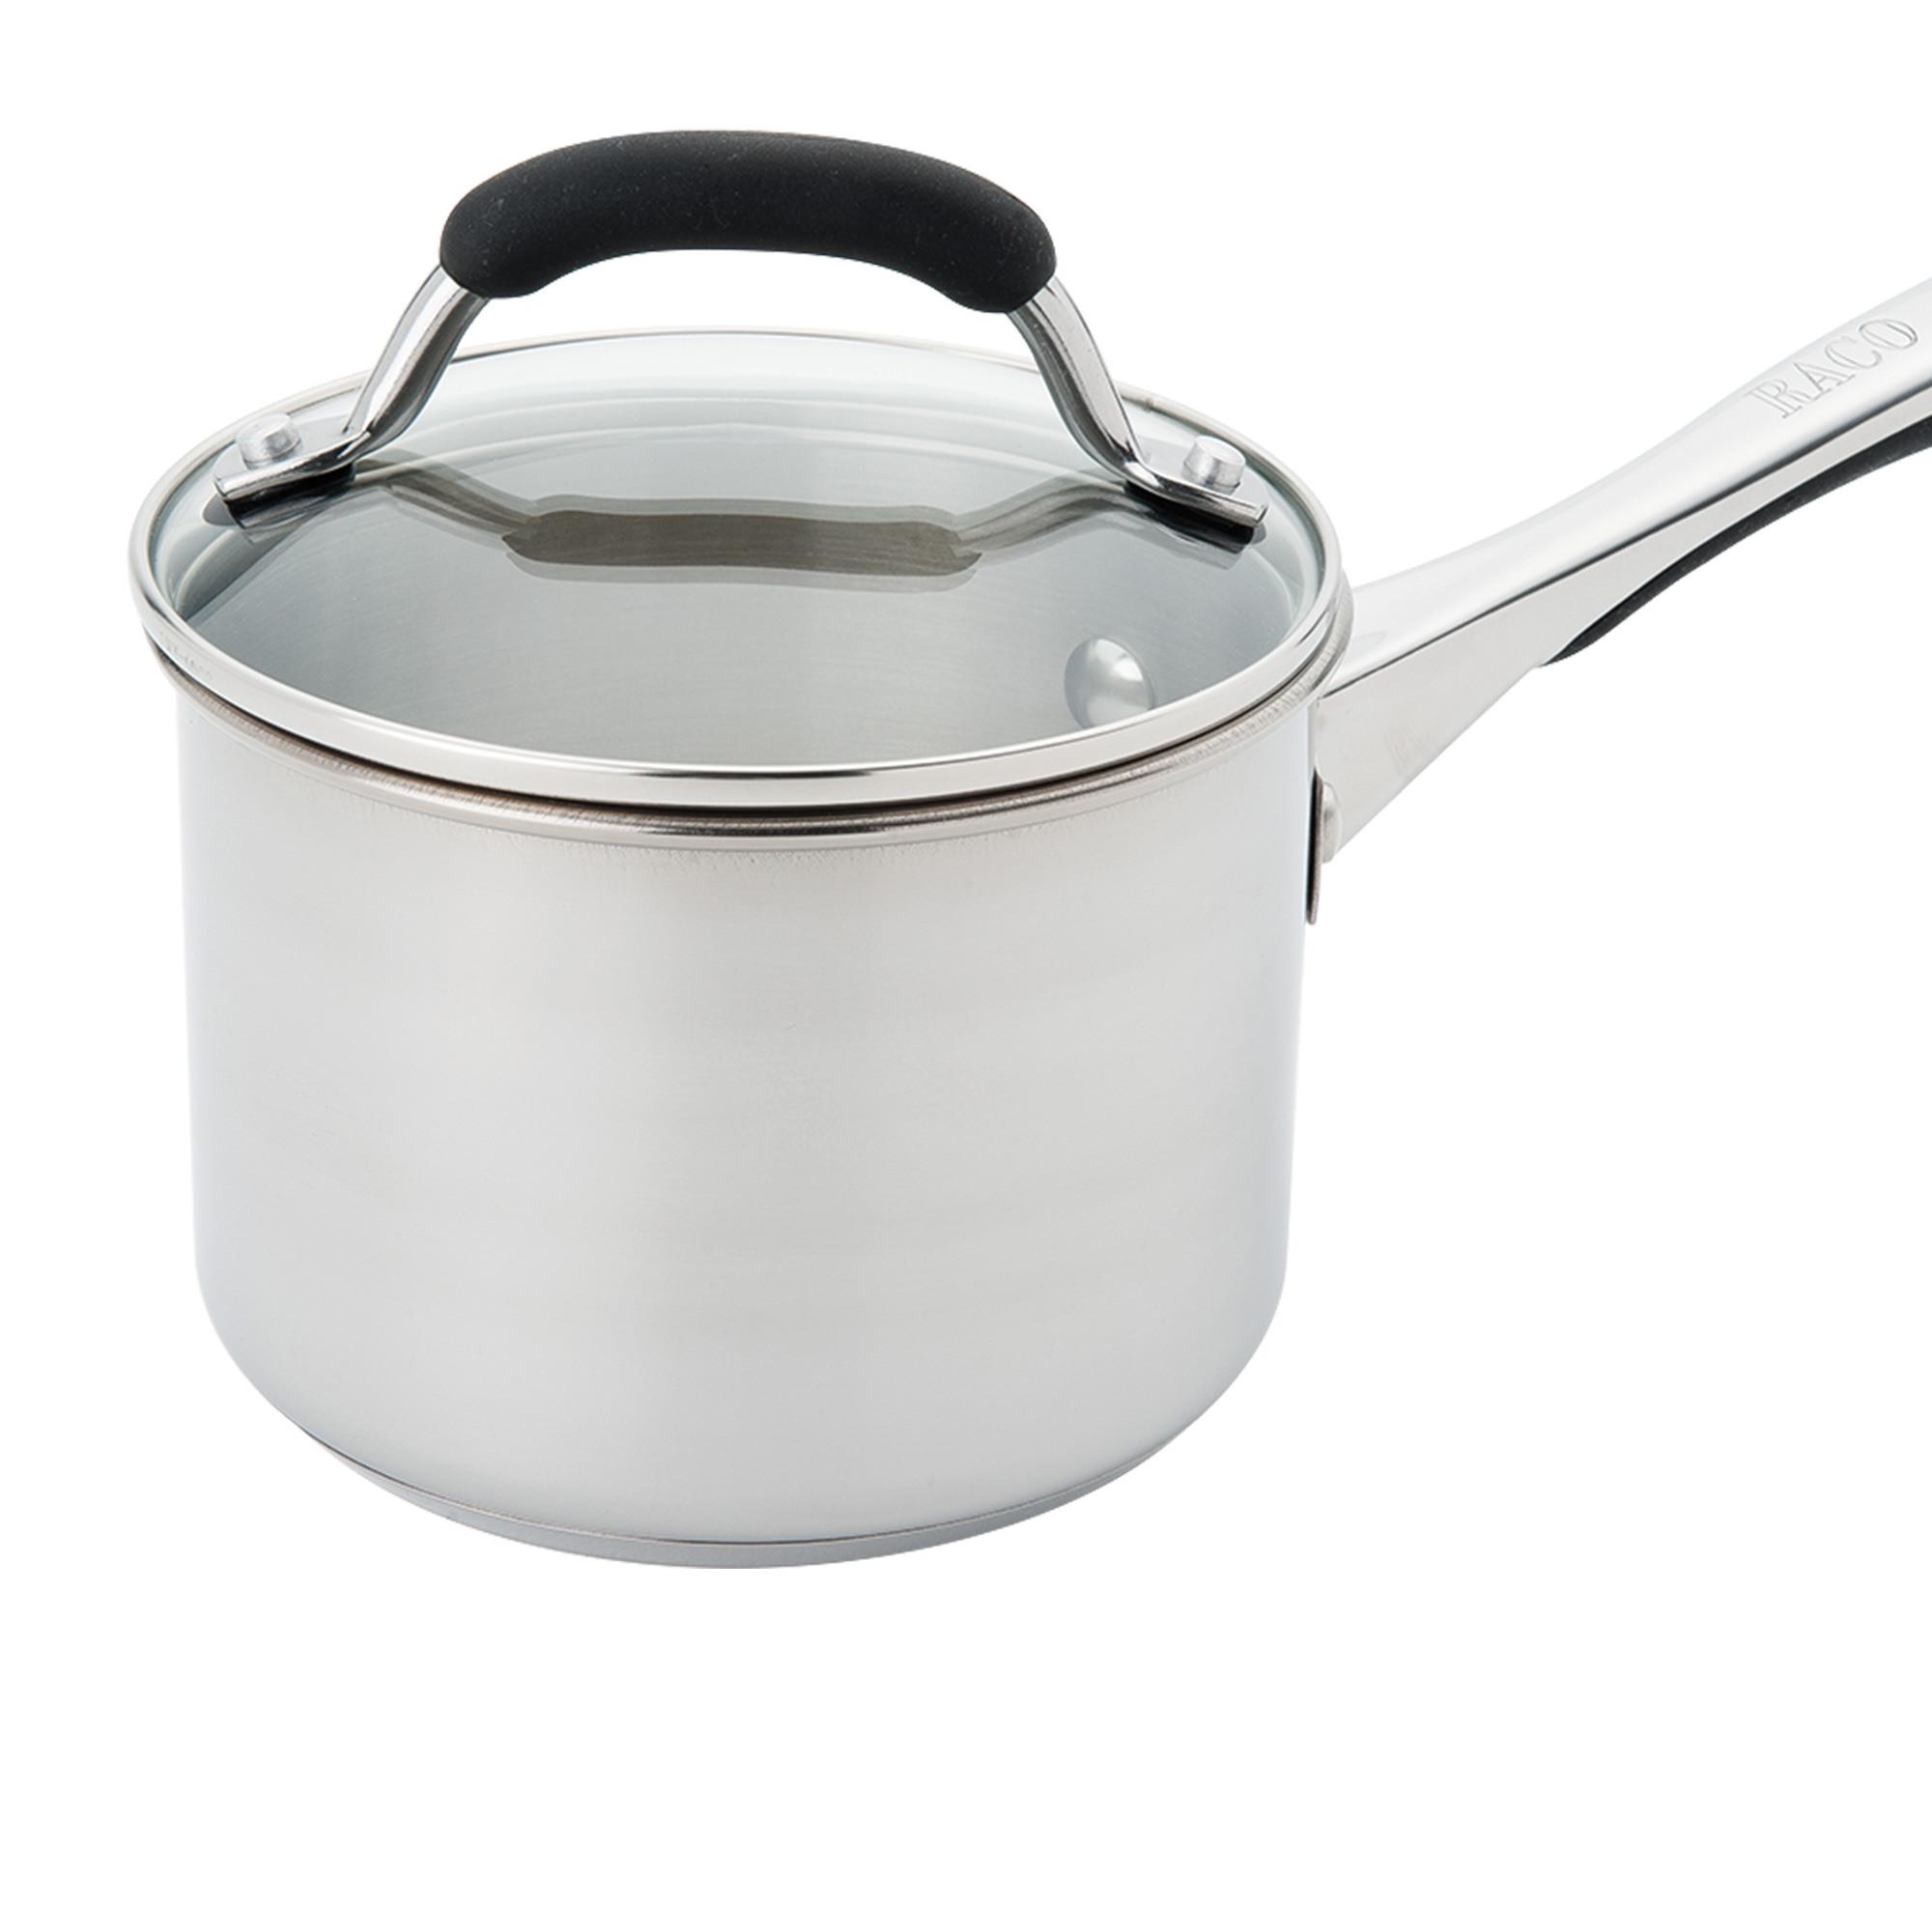 Raco Contemporary Stainless Steel Saucepan 18cm - 2.8L Image 4